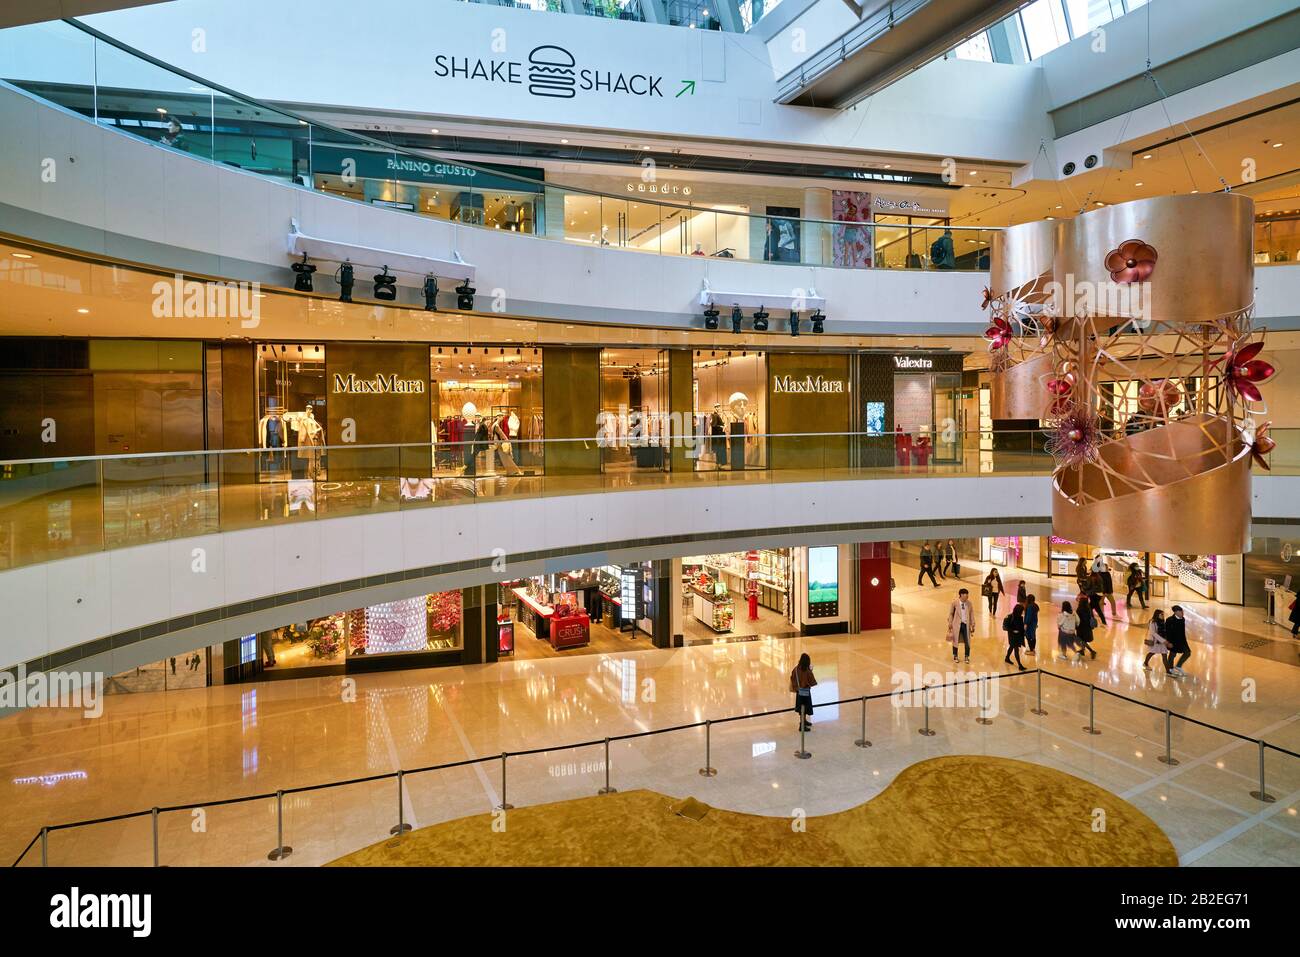 Commercial Center Ifc Mall High Resolution Stock Photography and Images -  Alamy